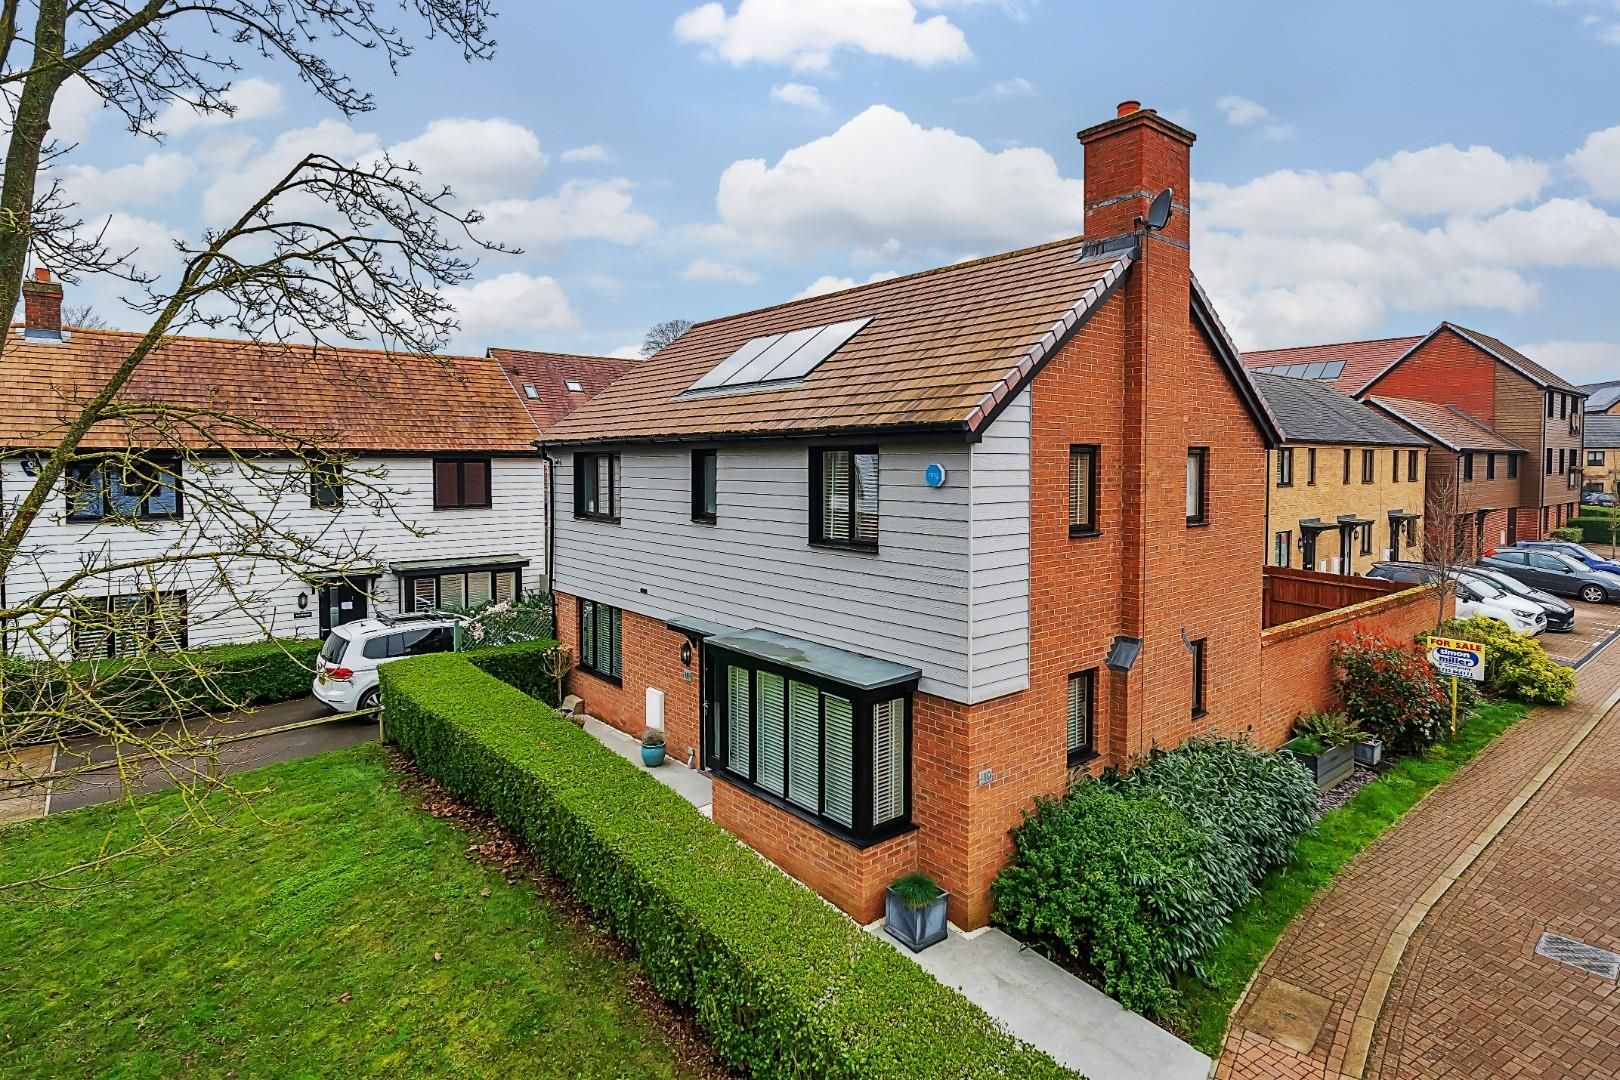 Hirschield Drive, Leybourne Chase, West Malling, Kent, ME19 5GN